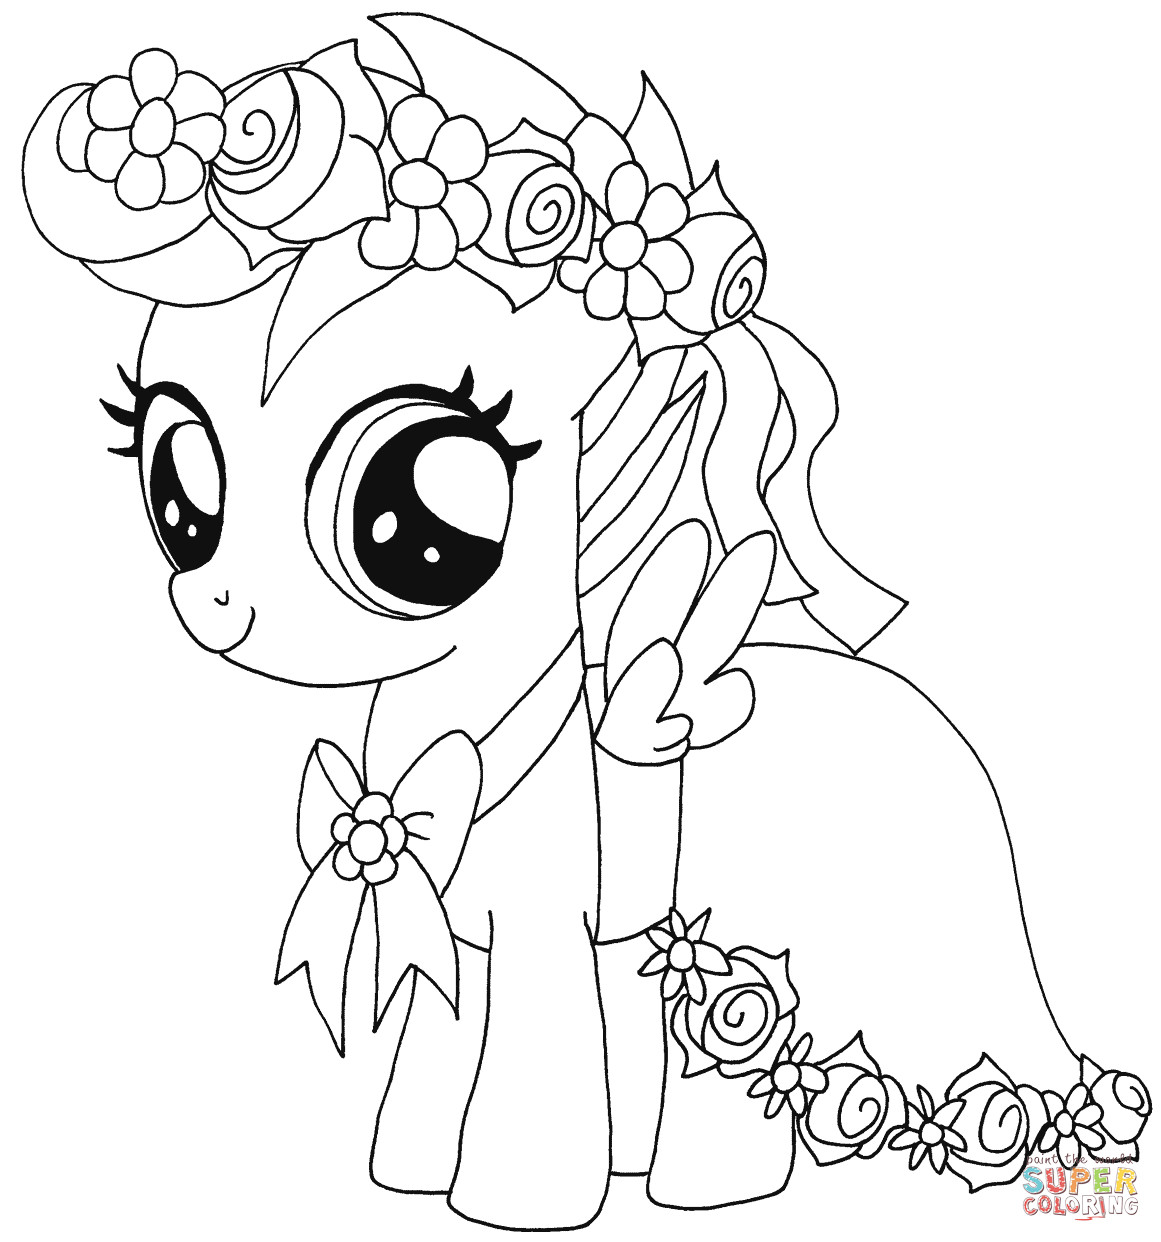 Baby Pony Coloring Pages
 My Little Pony Scootaloo coloring page